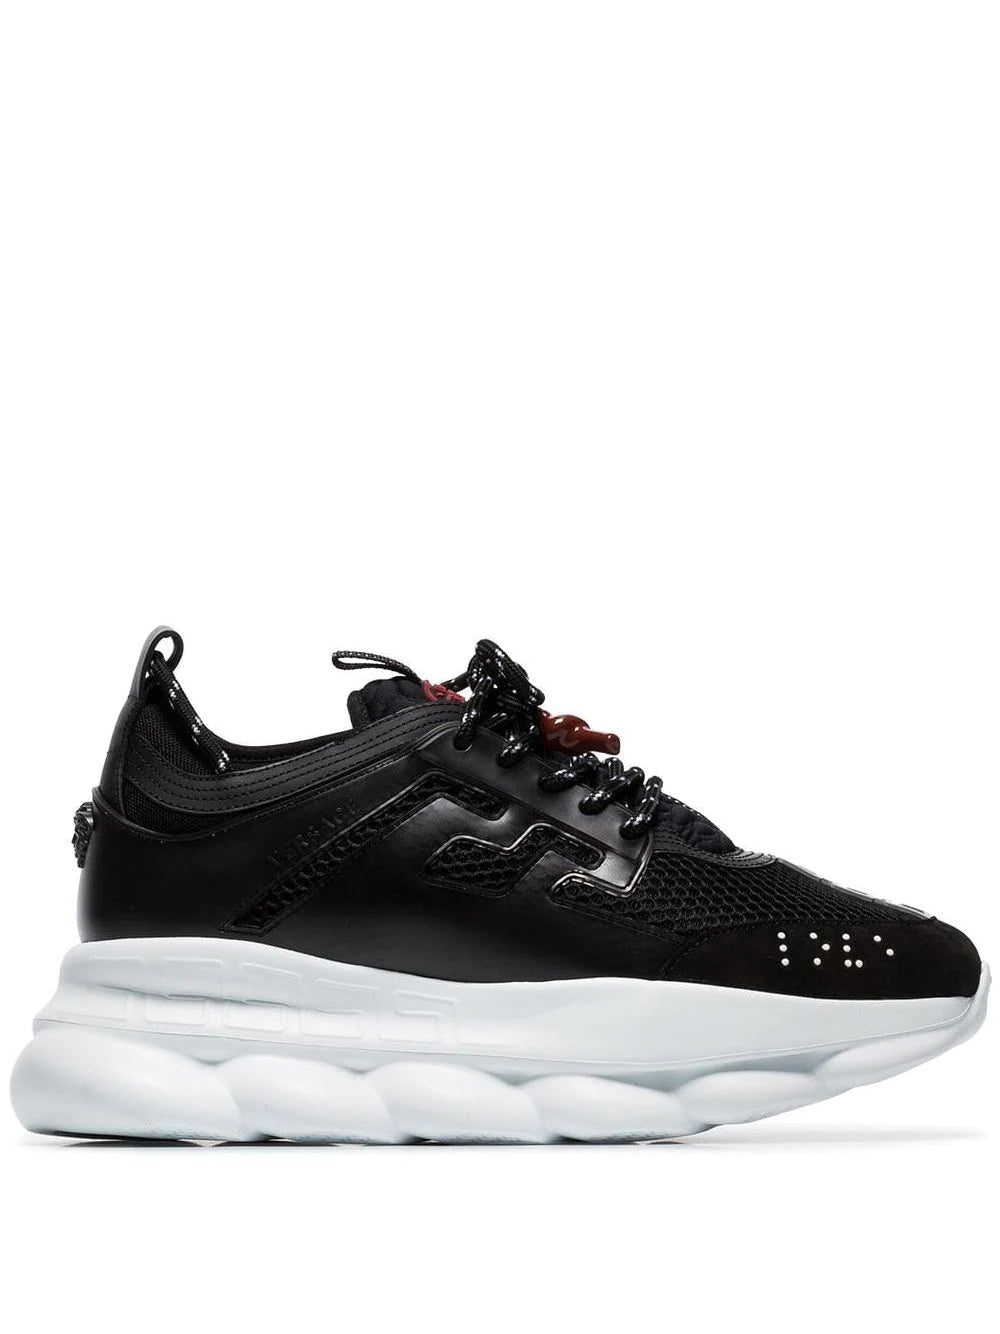 Versace Chain Reaction Sneakers Black/White – HRR LUXURY